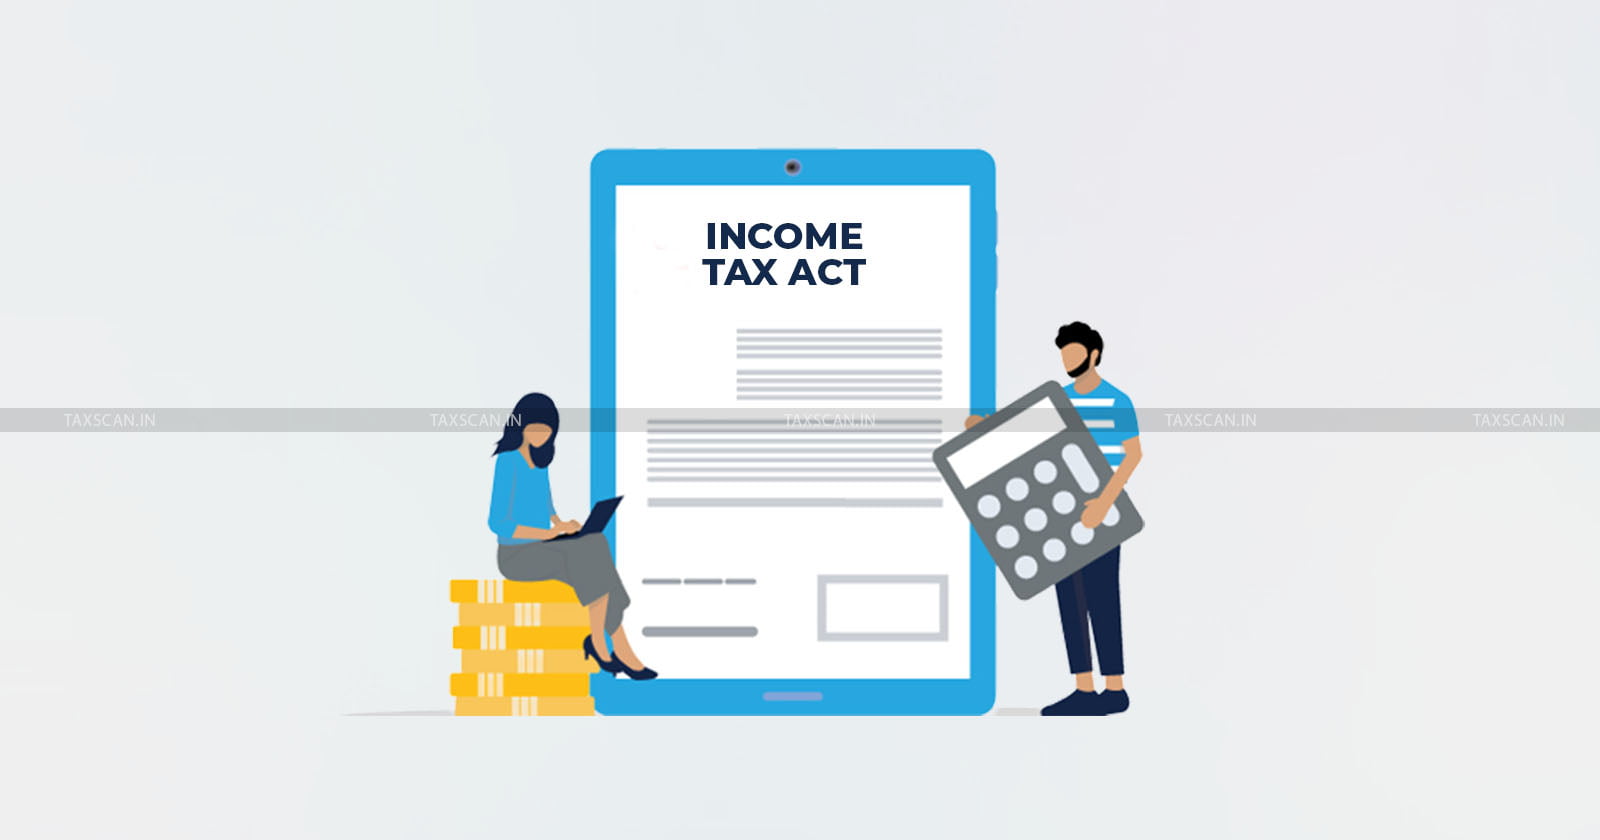 Anonymous Donations received by Trusts carrying on religious and charitable activities approved u/s 10(23C)(v) of Income Tax Act eligible for benefit of exclusion in Section 115BBC(2)(b) of IT Act: ITAT